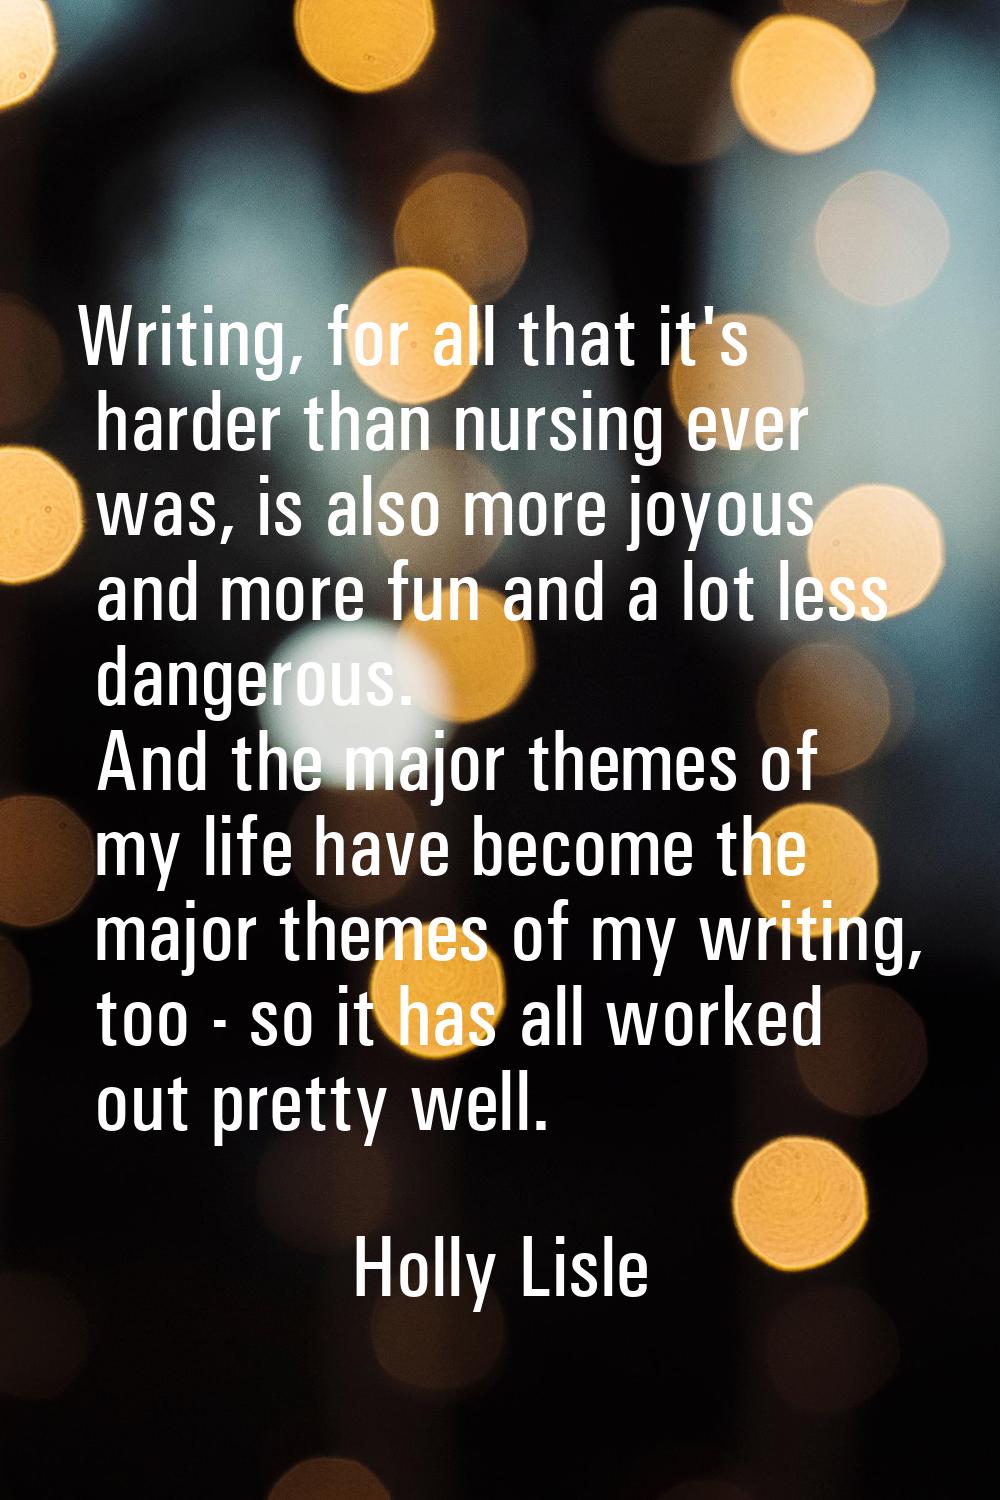 Writing, for all that it's harder than nursing ever was, is also more joyous and more fun and a lot